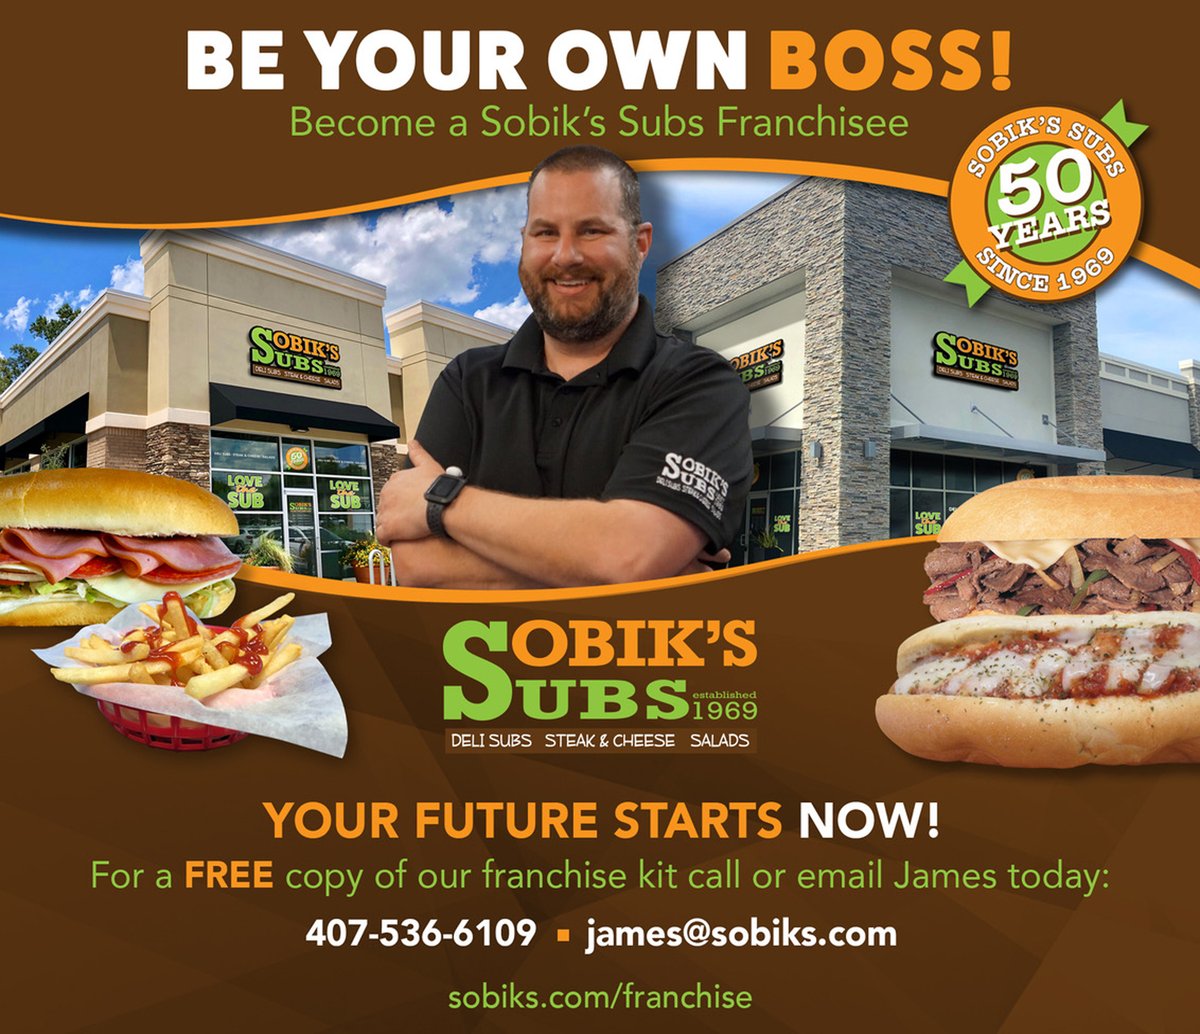 Is 2020 the year you become your own boss? 

#sobiks #subs #franchiseownership